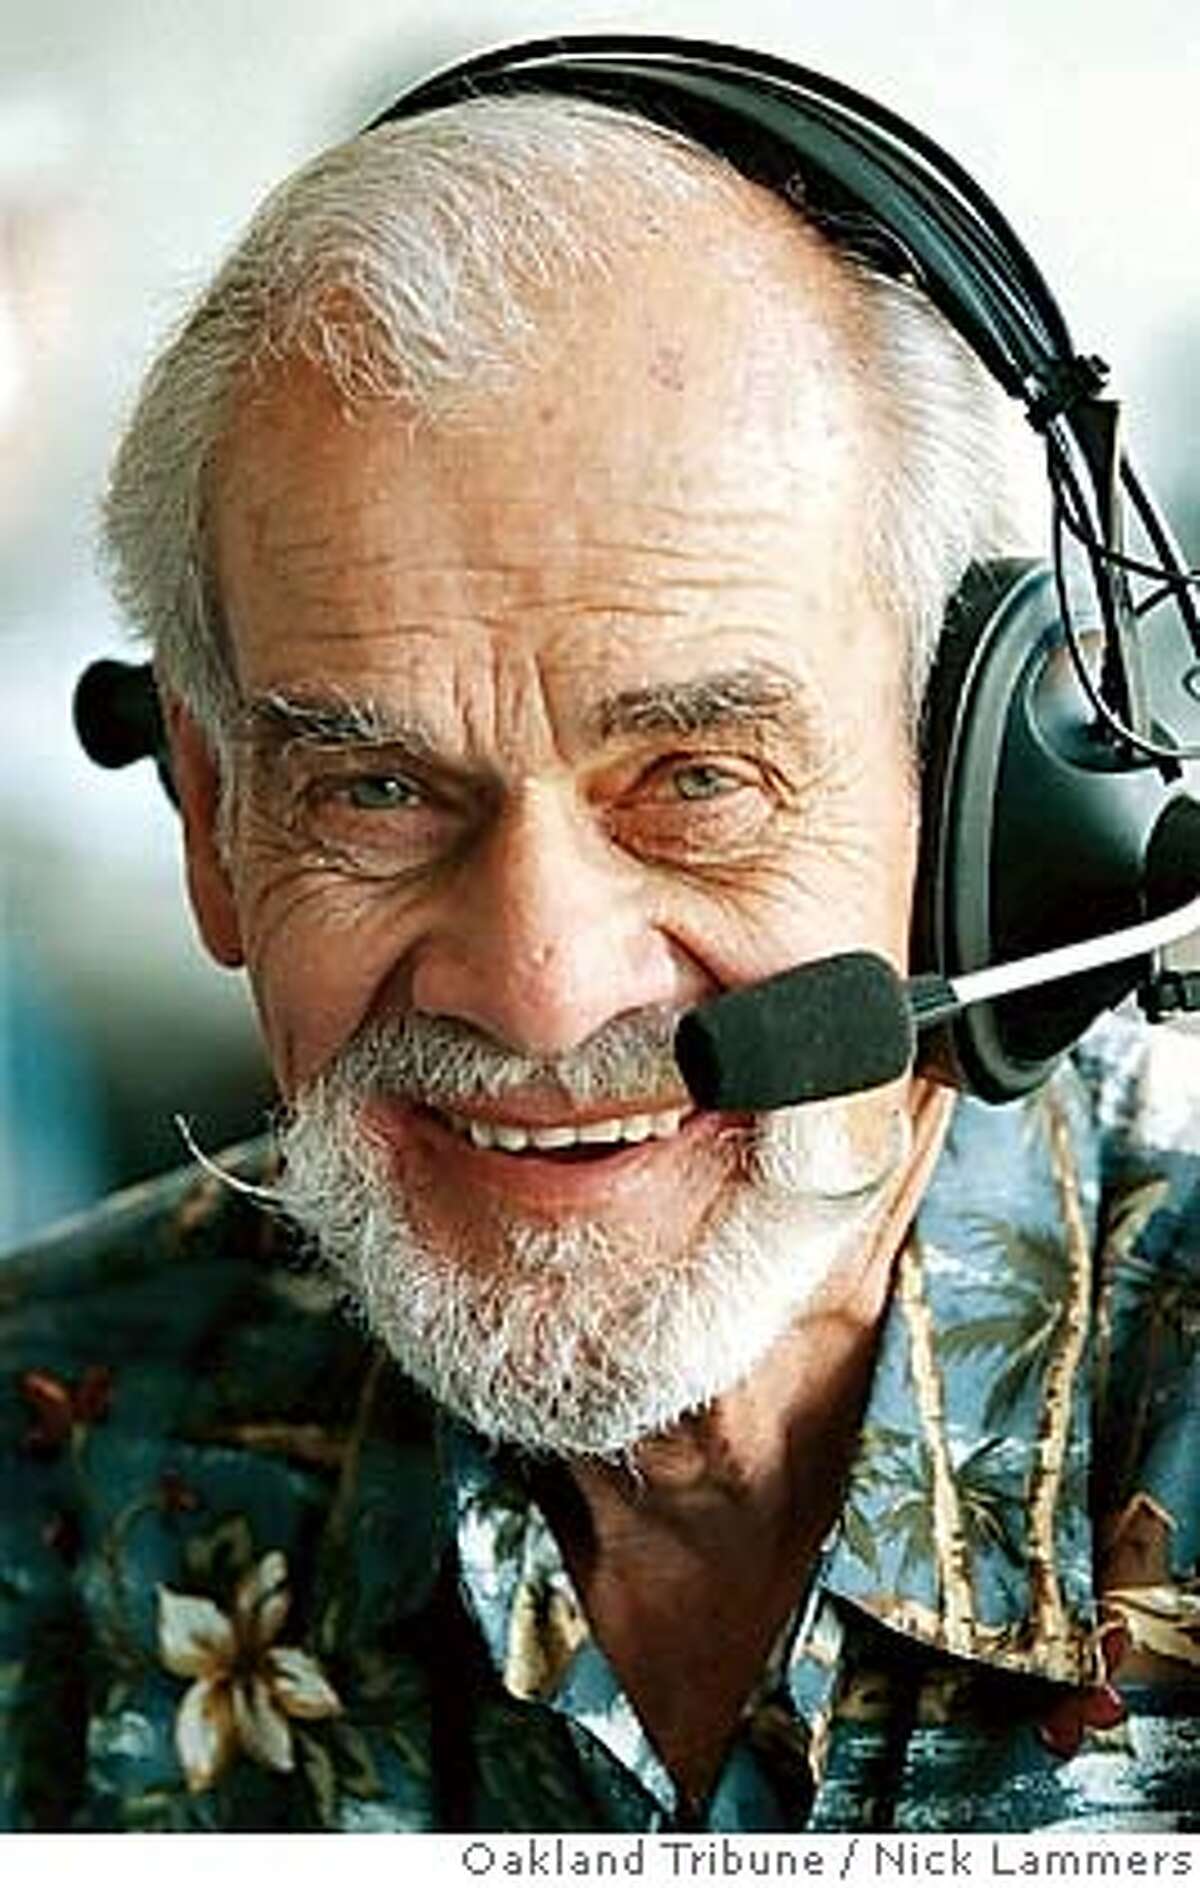 Longtime Oakland Athletics radio voice Bill King is shown in this photo taken Thursday, April 15, 1999, in Oakland Calif. King, whose signature call of "Holy Toledo!" was a household phrase for decades in the Bay Area, died early Tuesday, Oct. 18, 2005, from complications following hip surgery. He was 78. The A's said King died about 12:20 a.m. at a hospital in nearby San Leandro, three days after undergoing surgery for an injury sustained earlier this year.